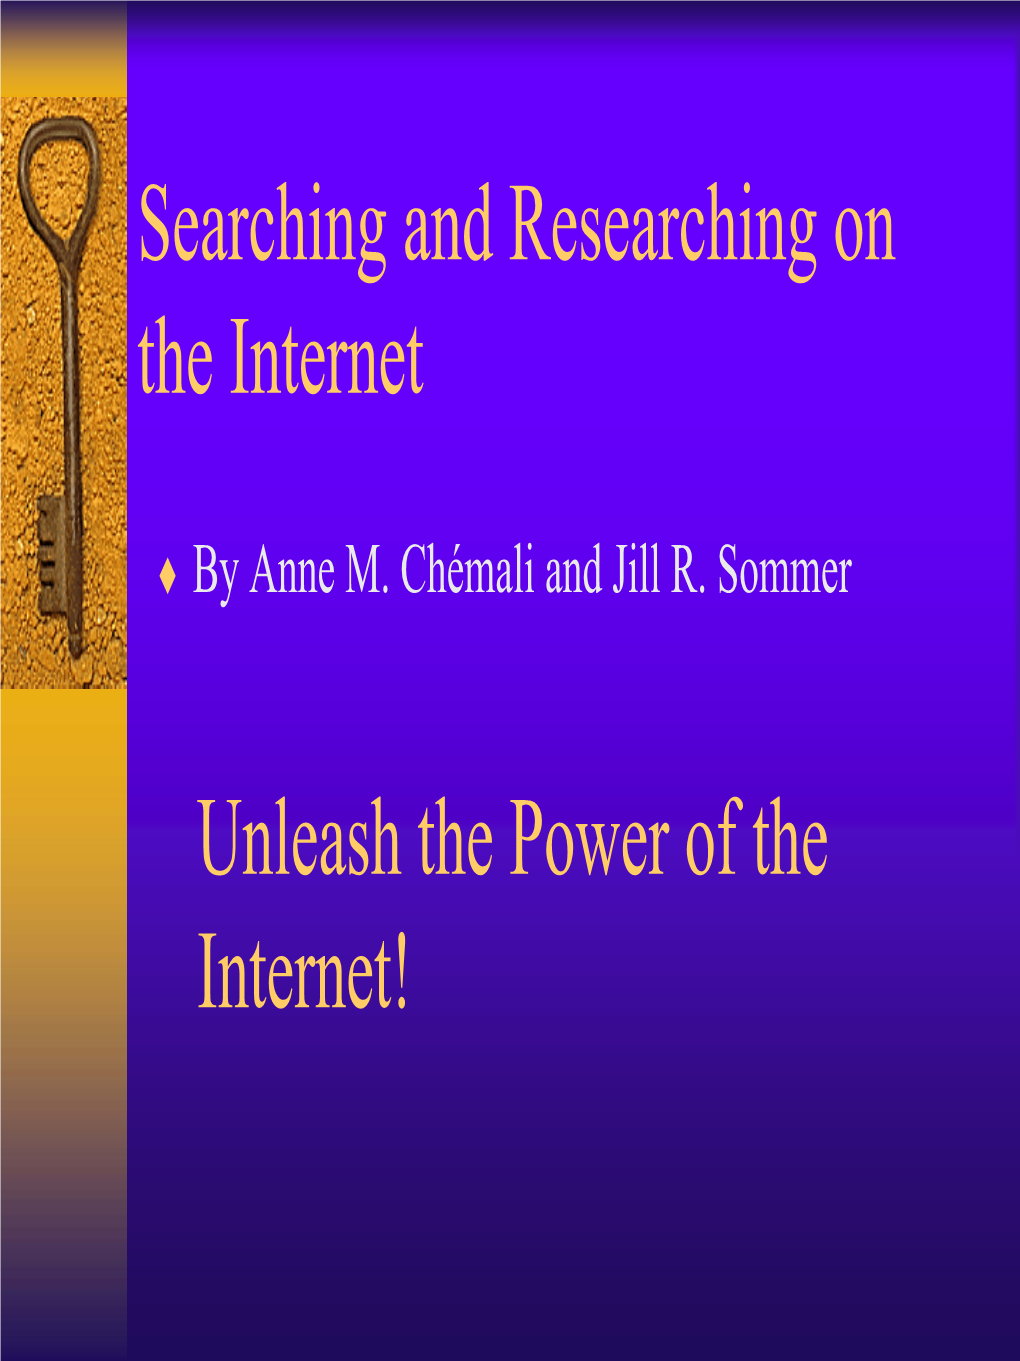 Searching and Researching on the Internet